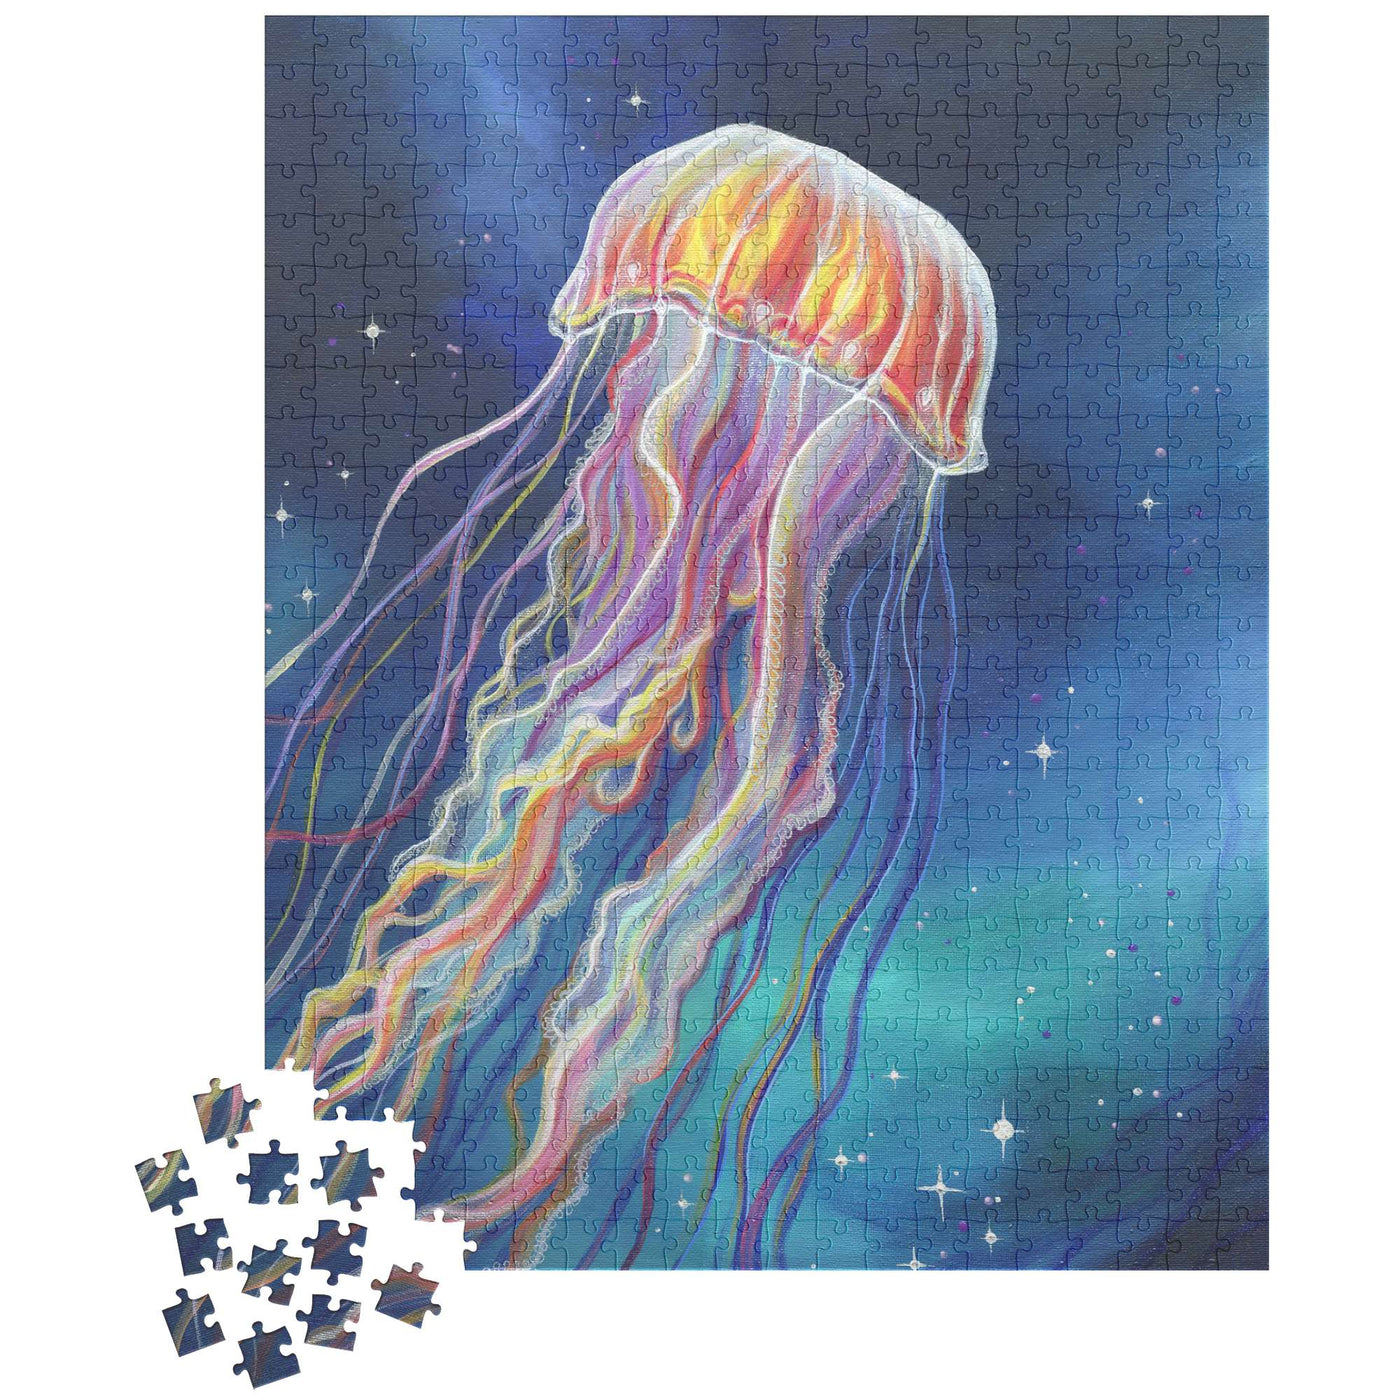 The Jellyfish Puzzle features a vibrant image of a jellyfish with colorful tentacles against a starry underwater backdrop. Some pieces are detached at the bottom left.